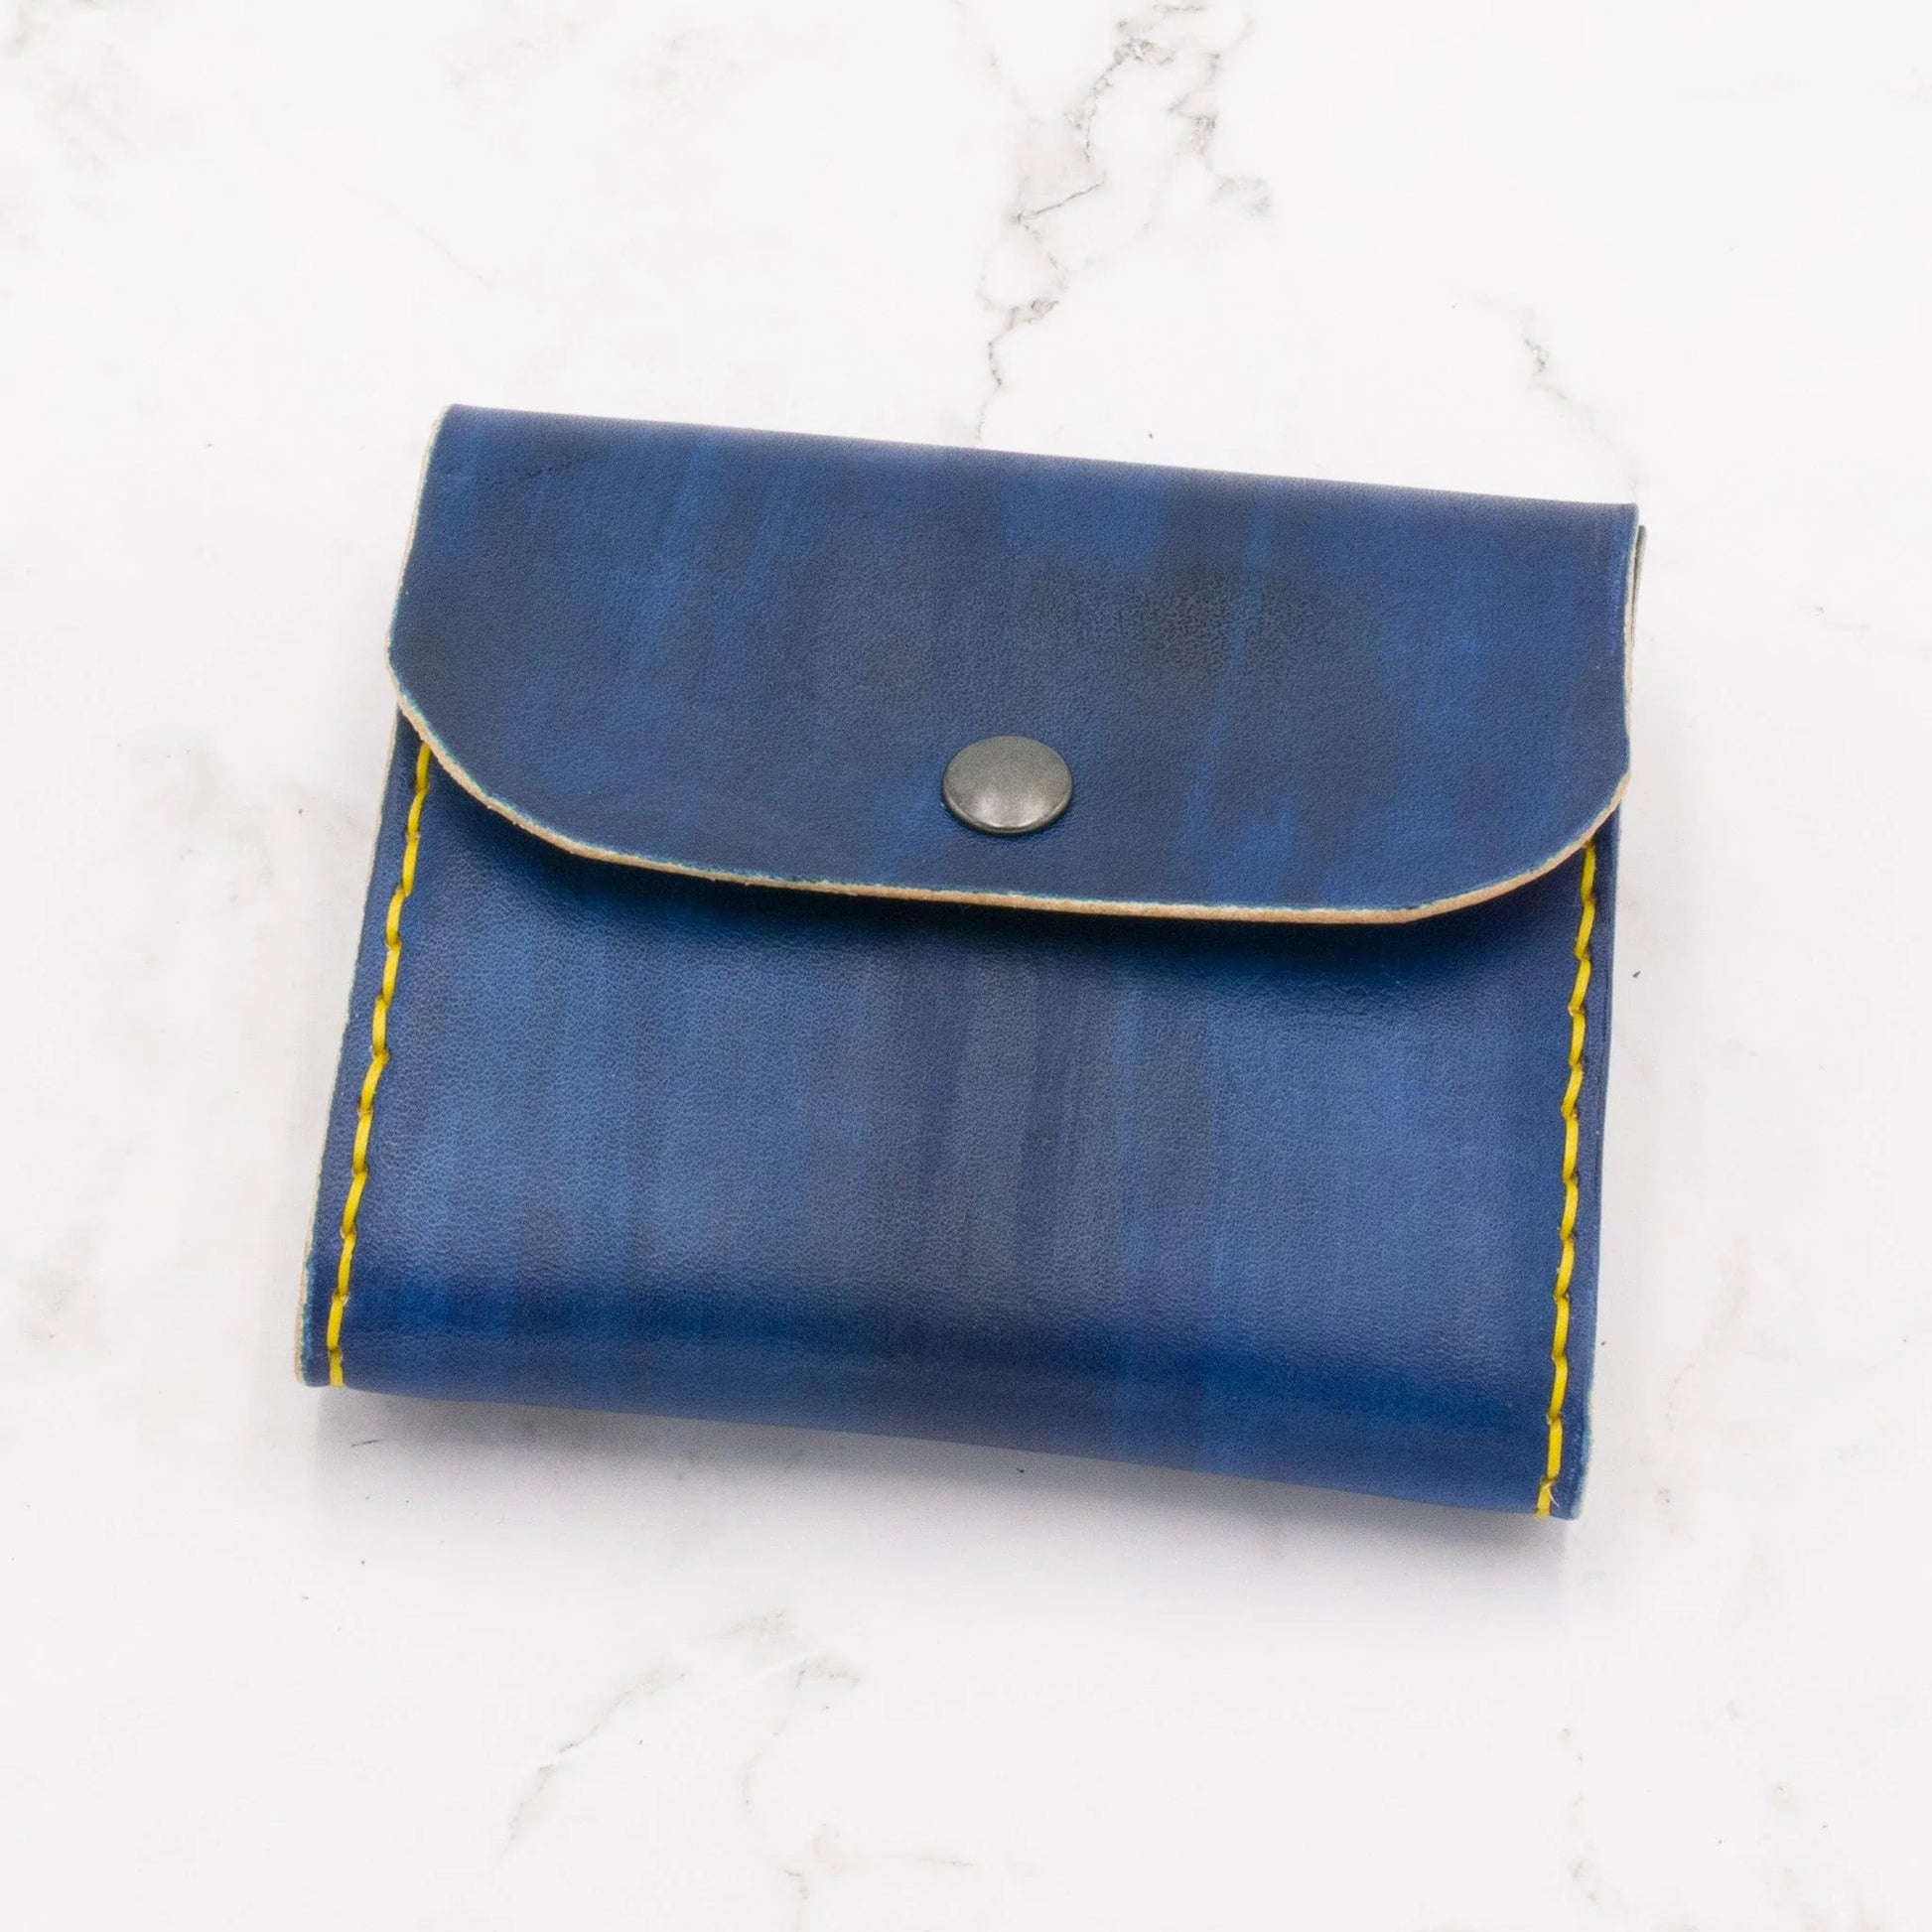 Cheekoo's Handcrafted Genuine Leather Accordion Wallet - Navy Blue